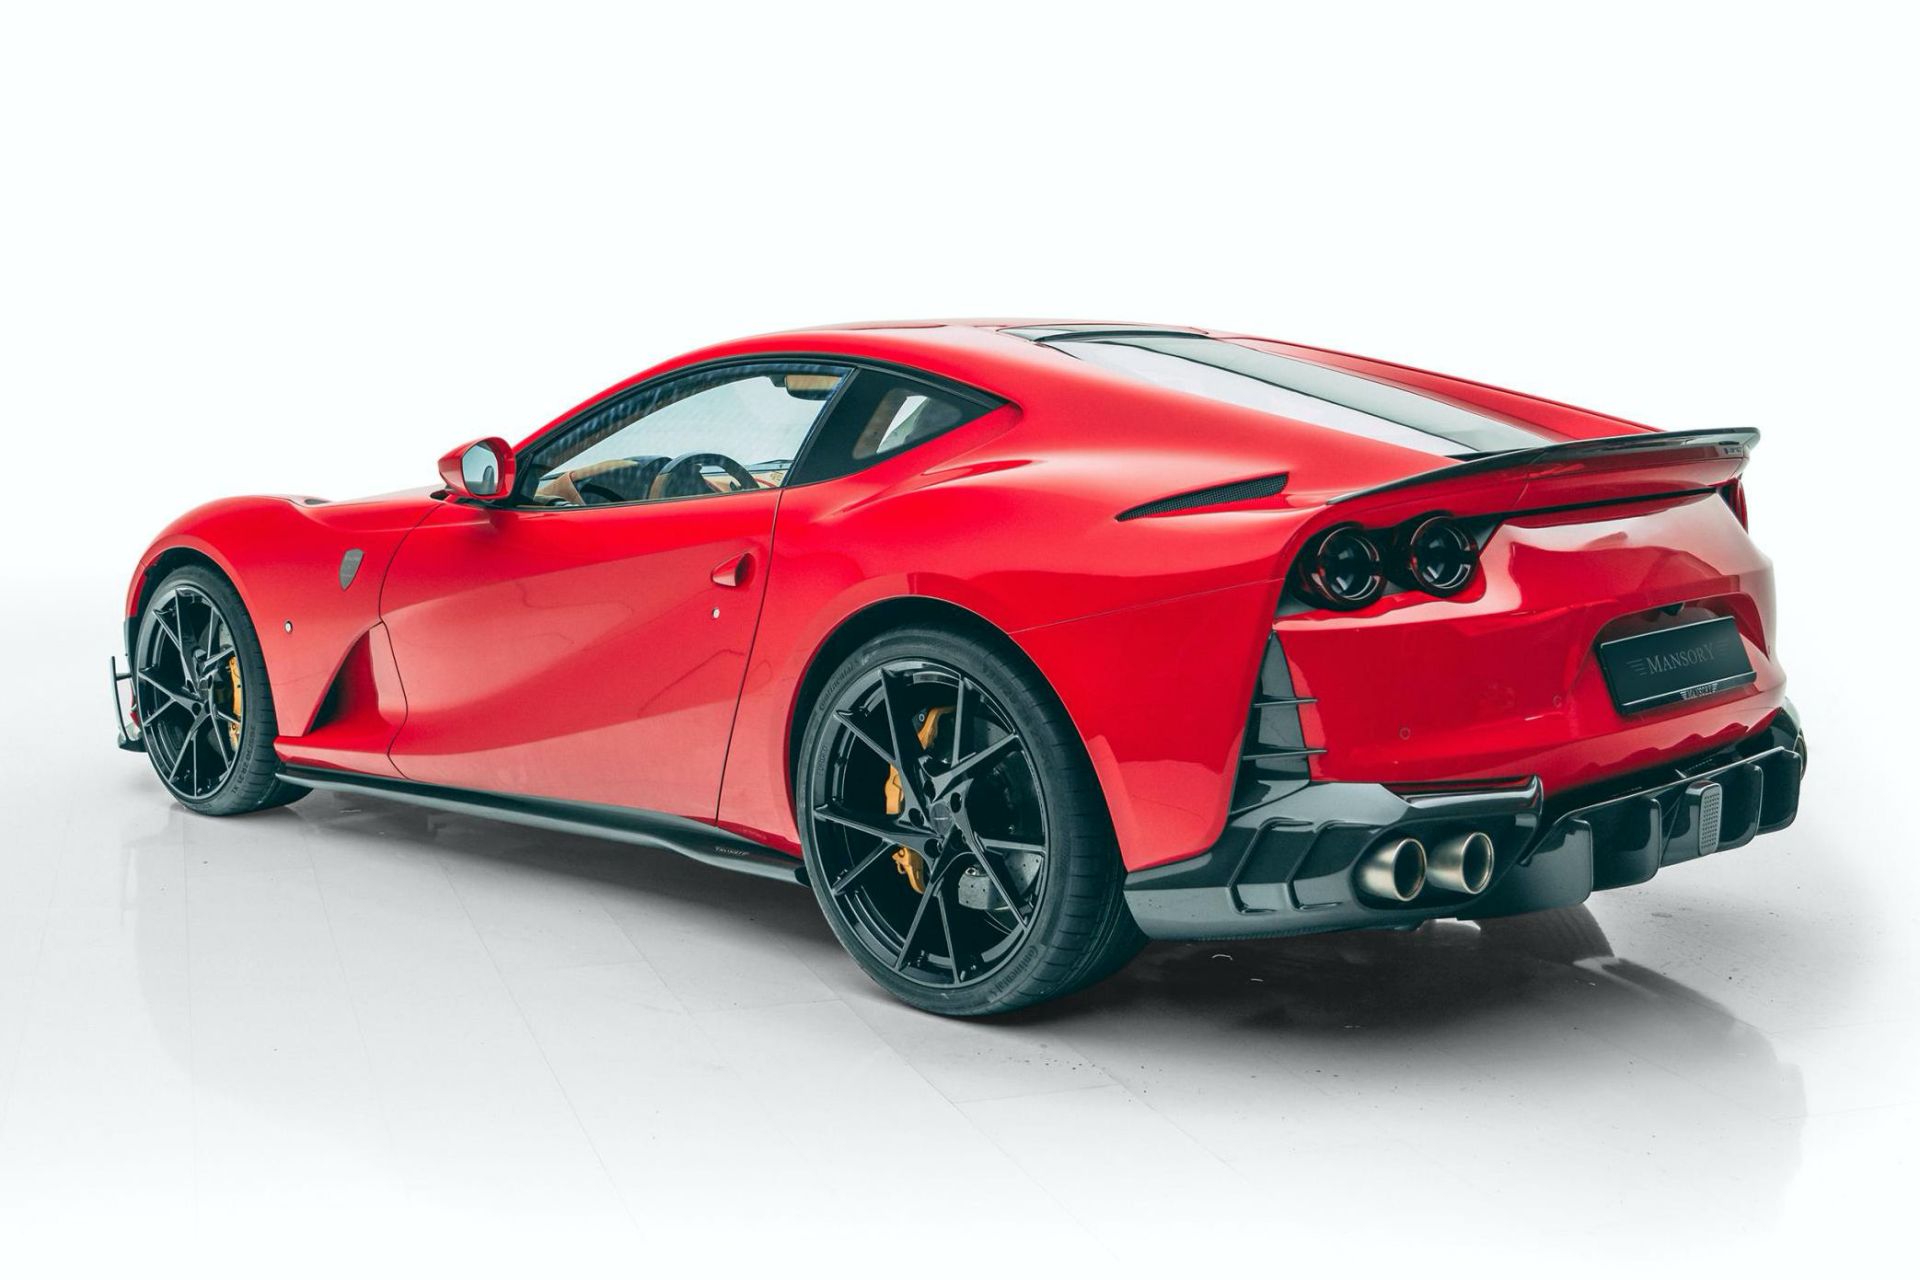 Surprisingly Mansory Goes Soft On New Ferrari 812 Superfast Tune Carscoops